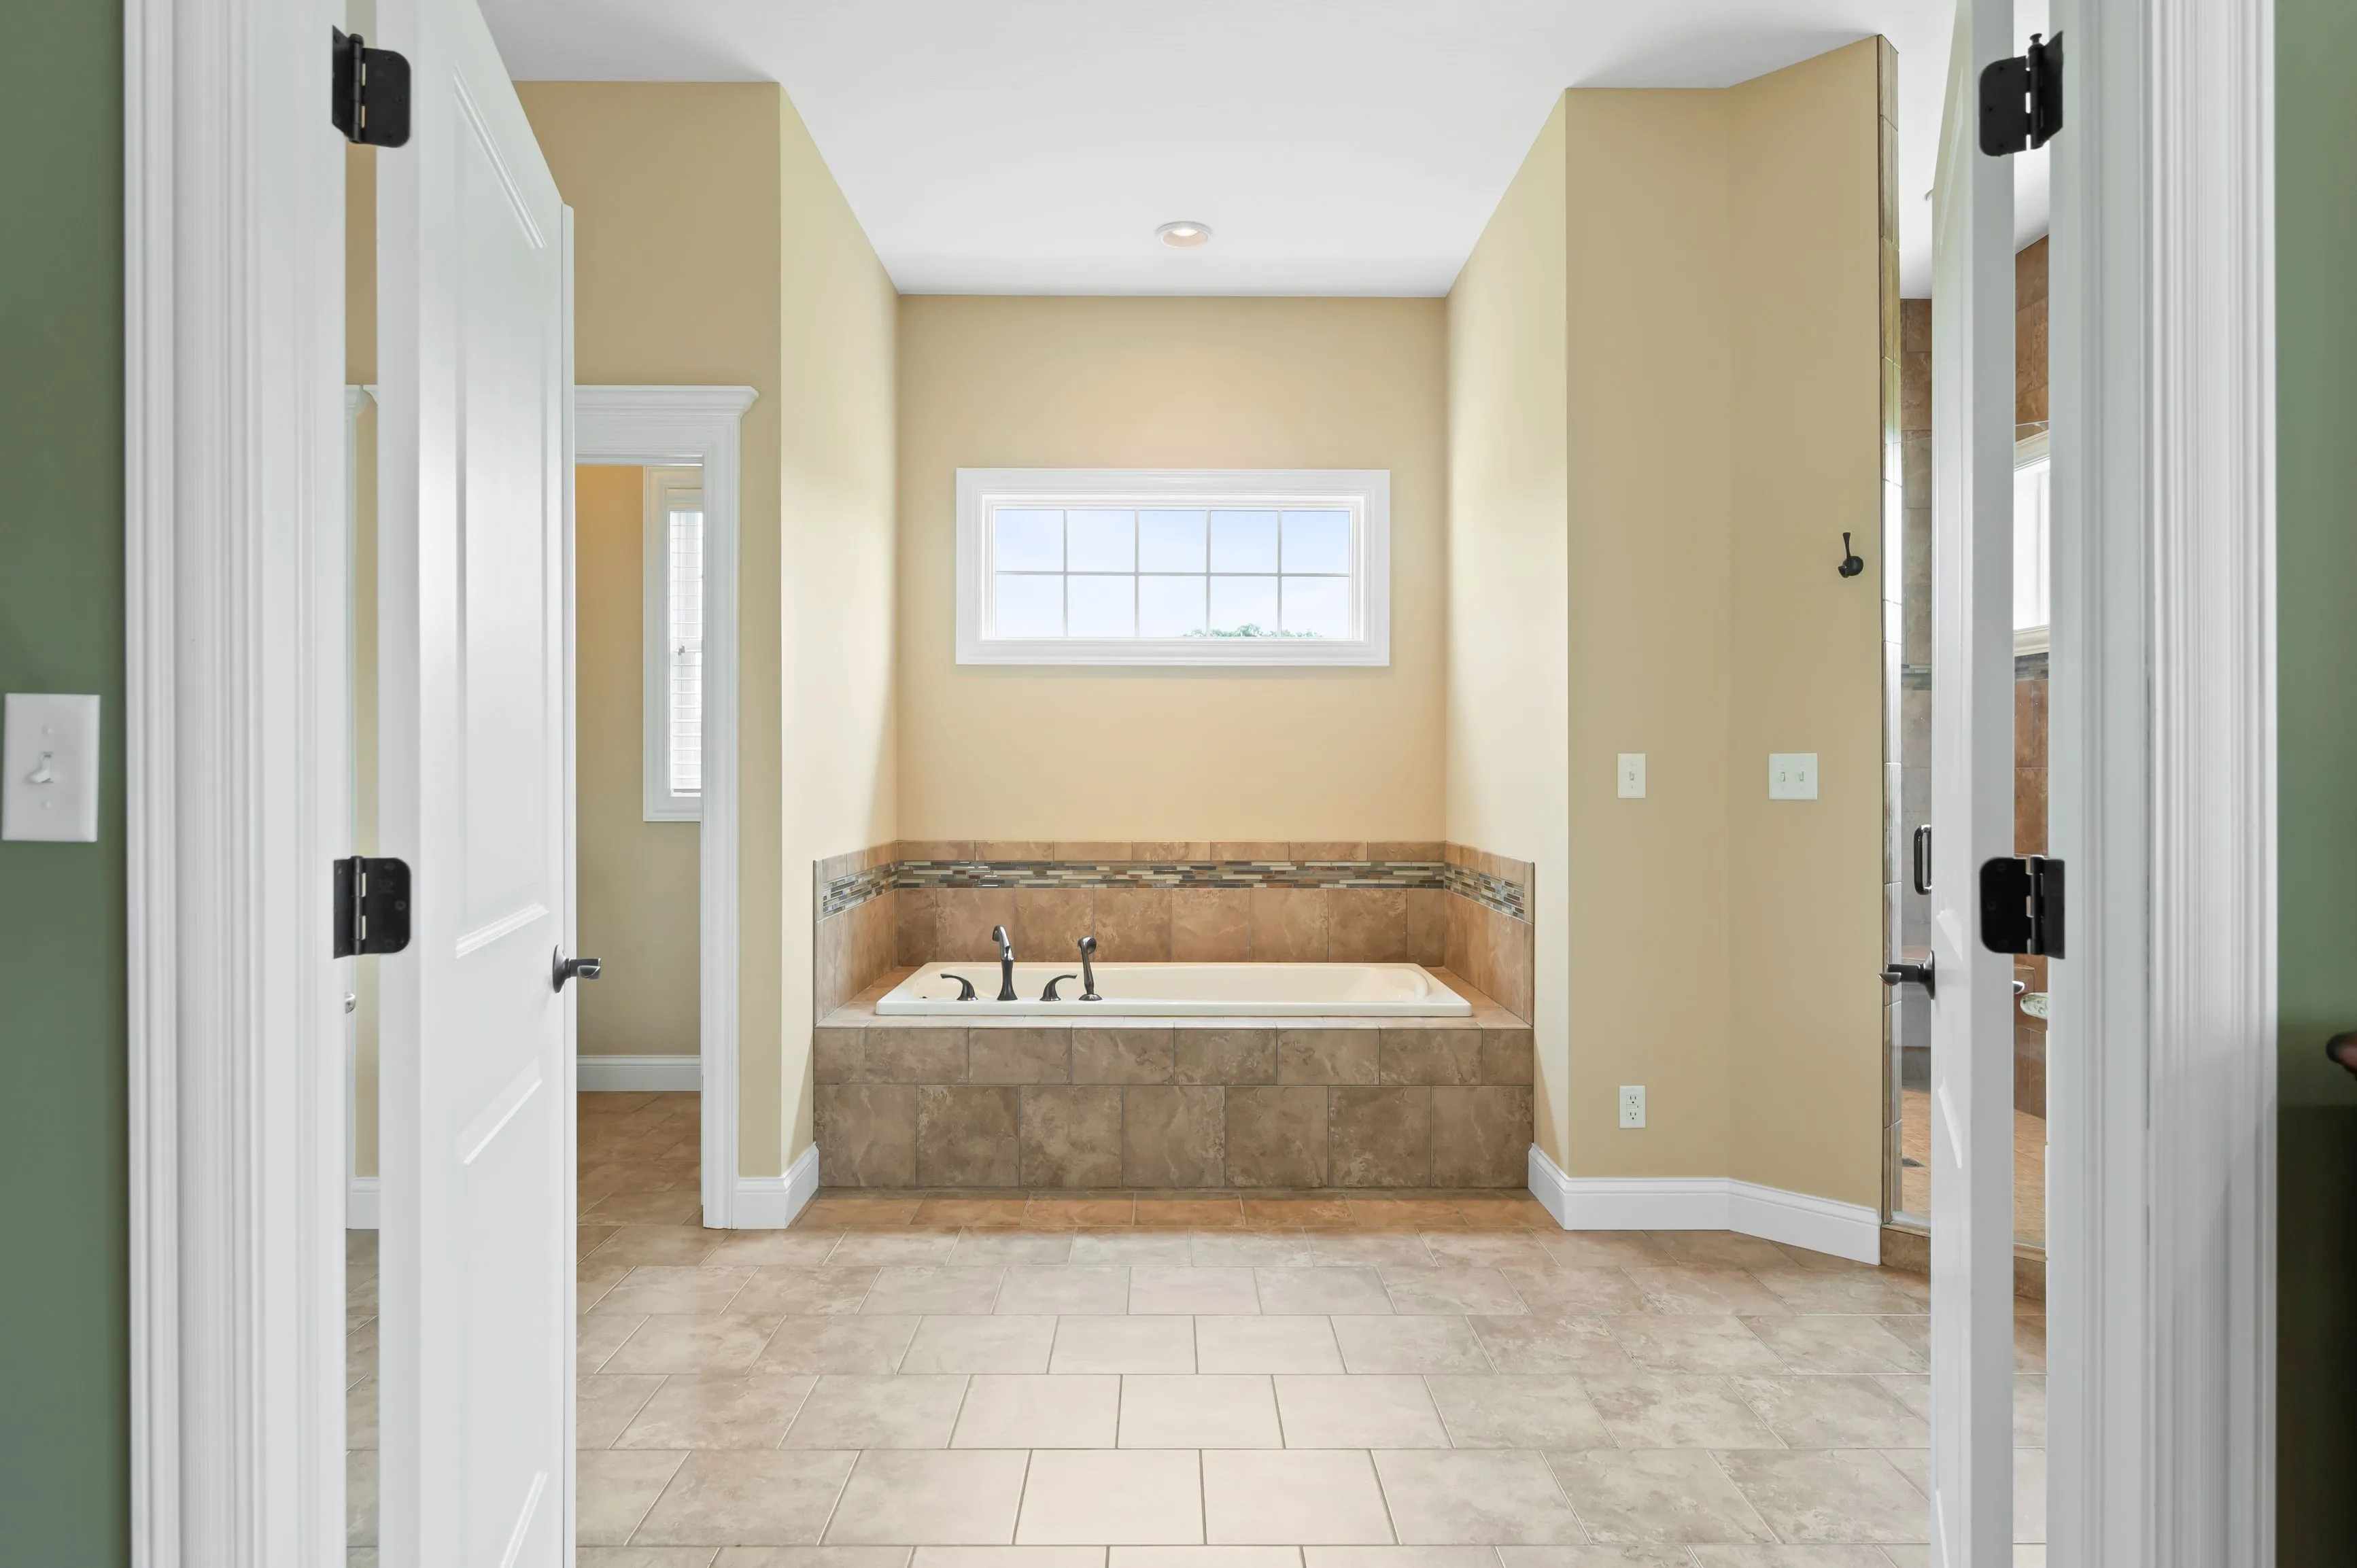 A spacious bathroom with beige walls, tiled flooring, a large built-in bathtub with tiled surround, seen through an open door.